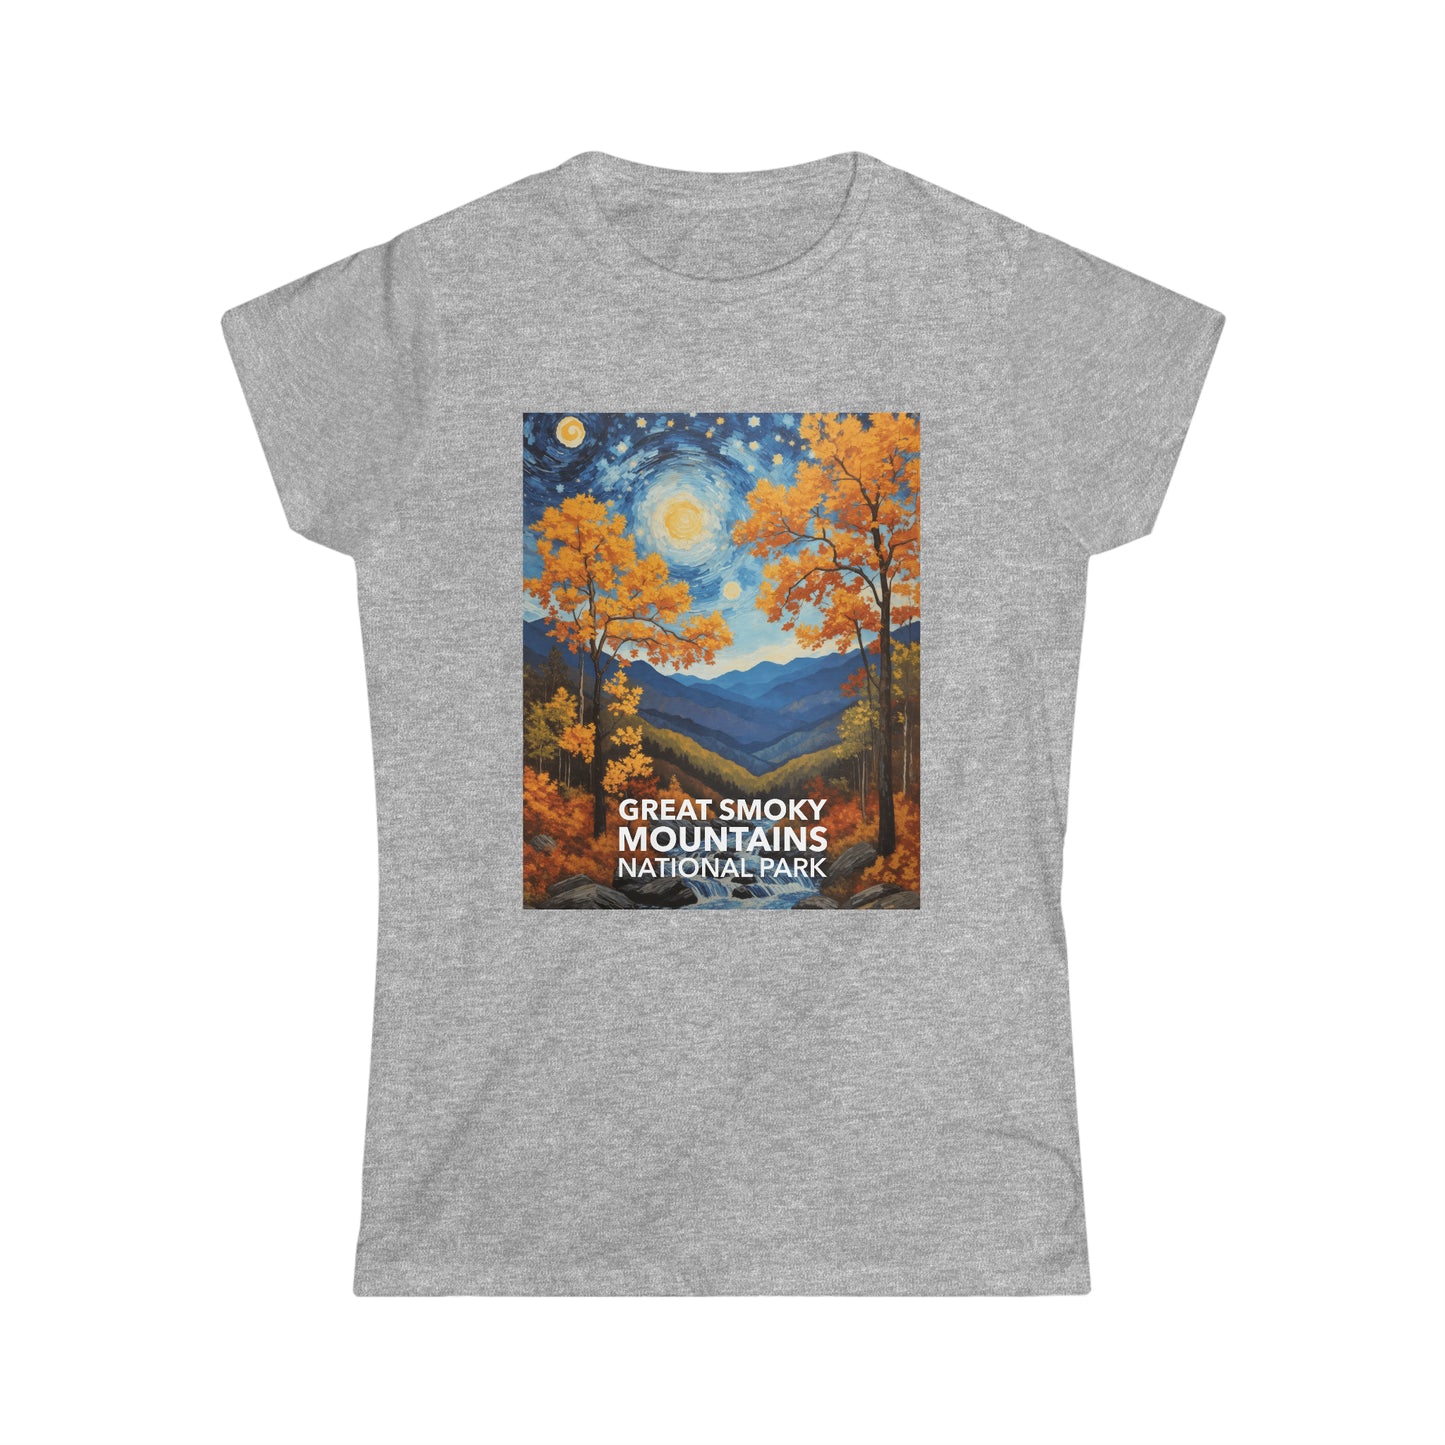 Great Smoky Mountains National Park T-Shirt - Women's Starry Night